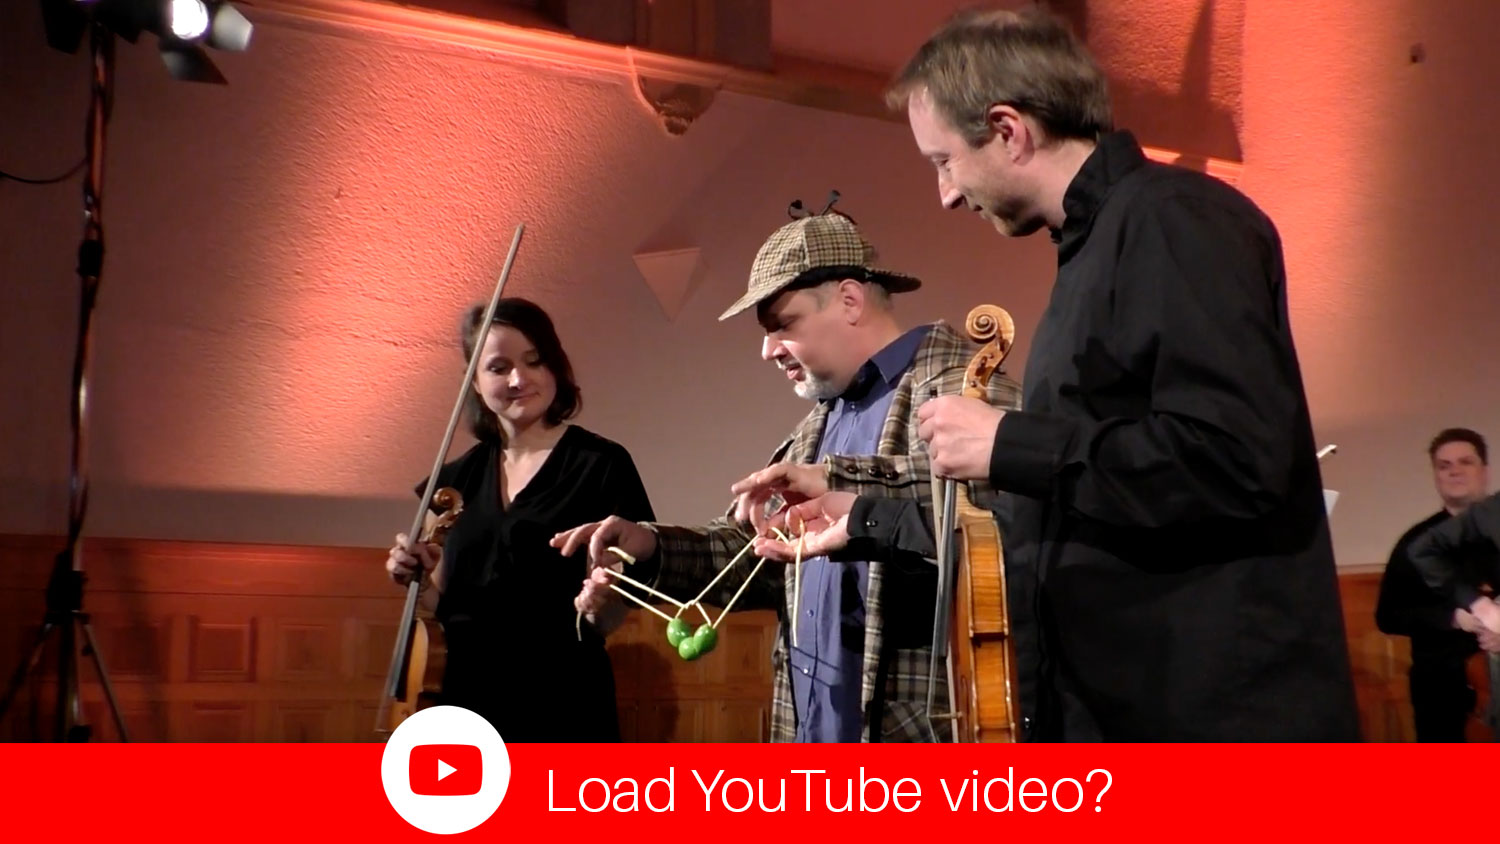 YouTube Video Music meets..., a project by the dogma chamber orchestra